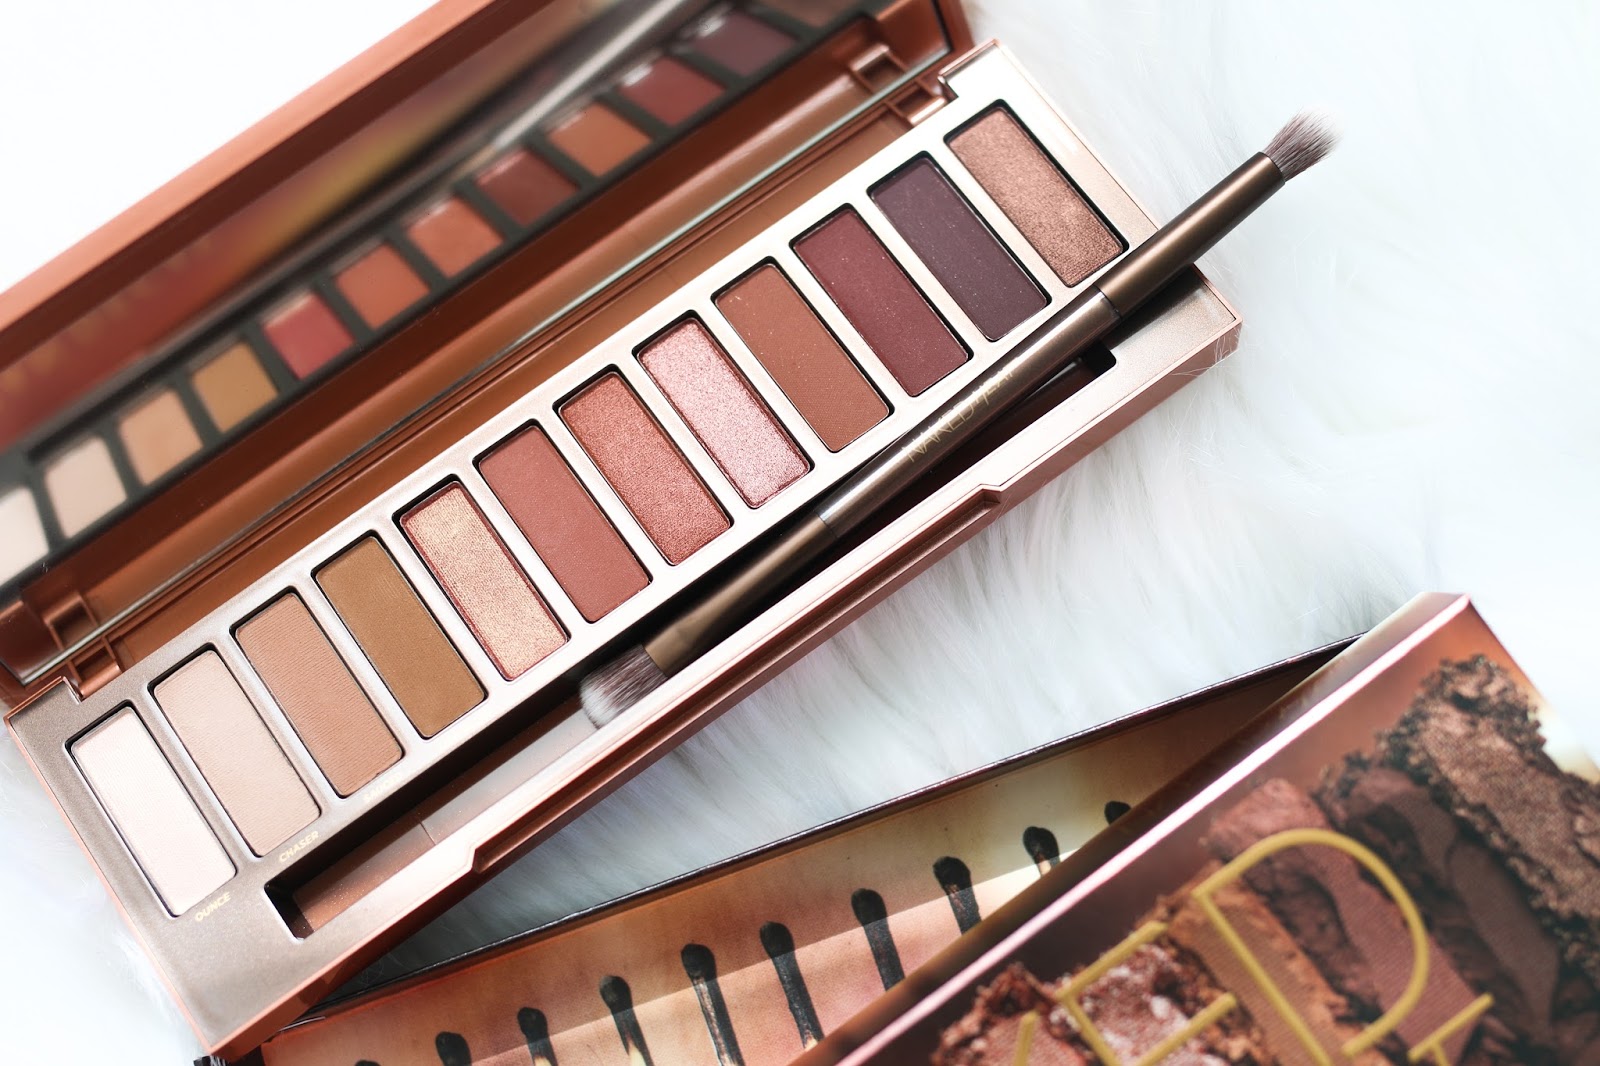 REVIEW: Urban Decay Naked Heat Palette - Time to Put my 